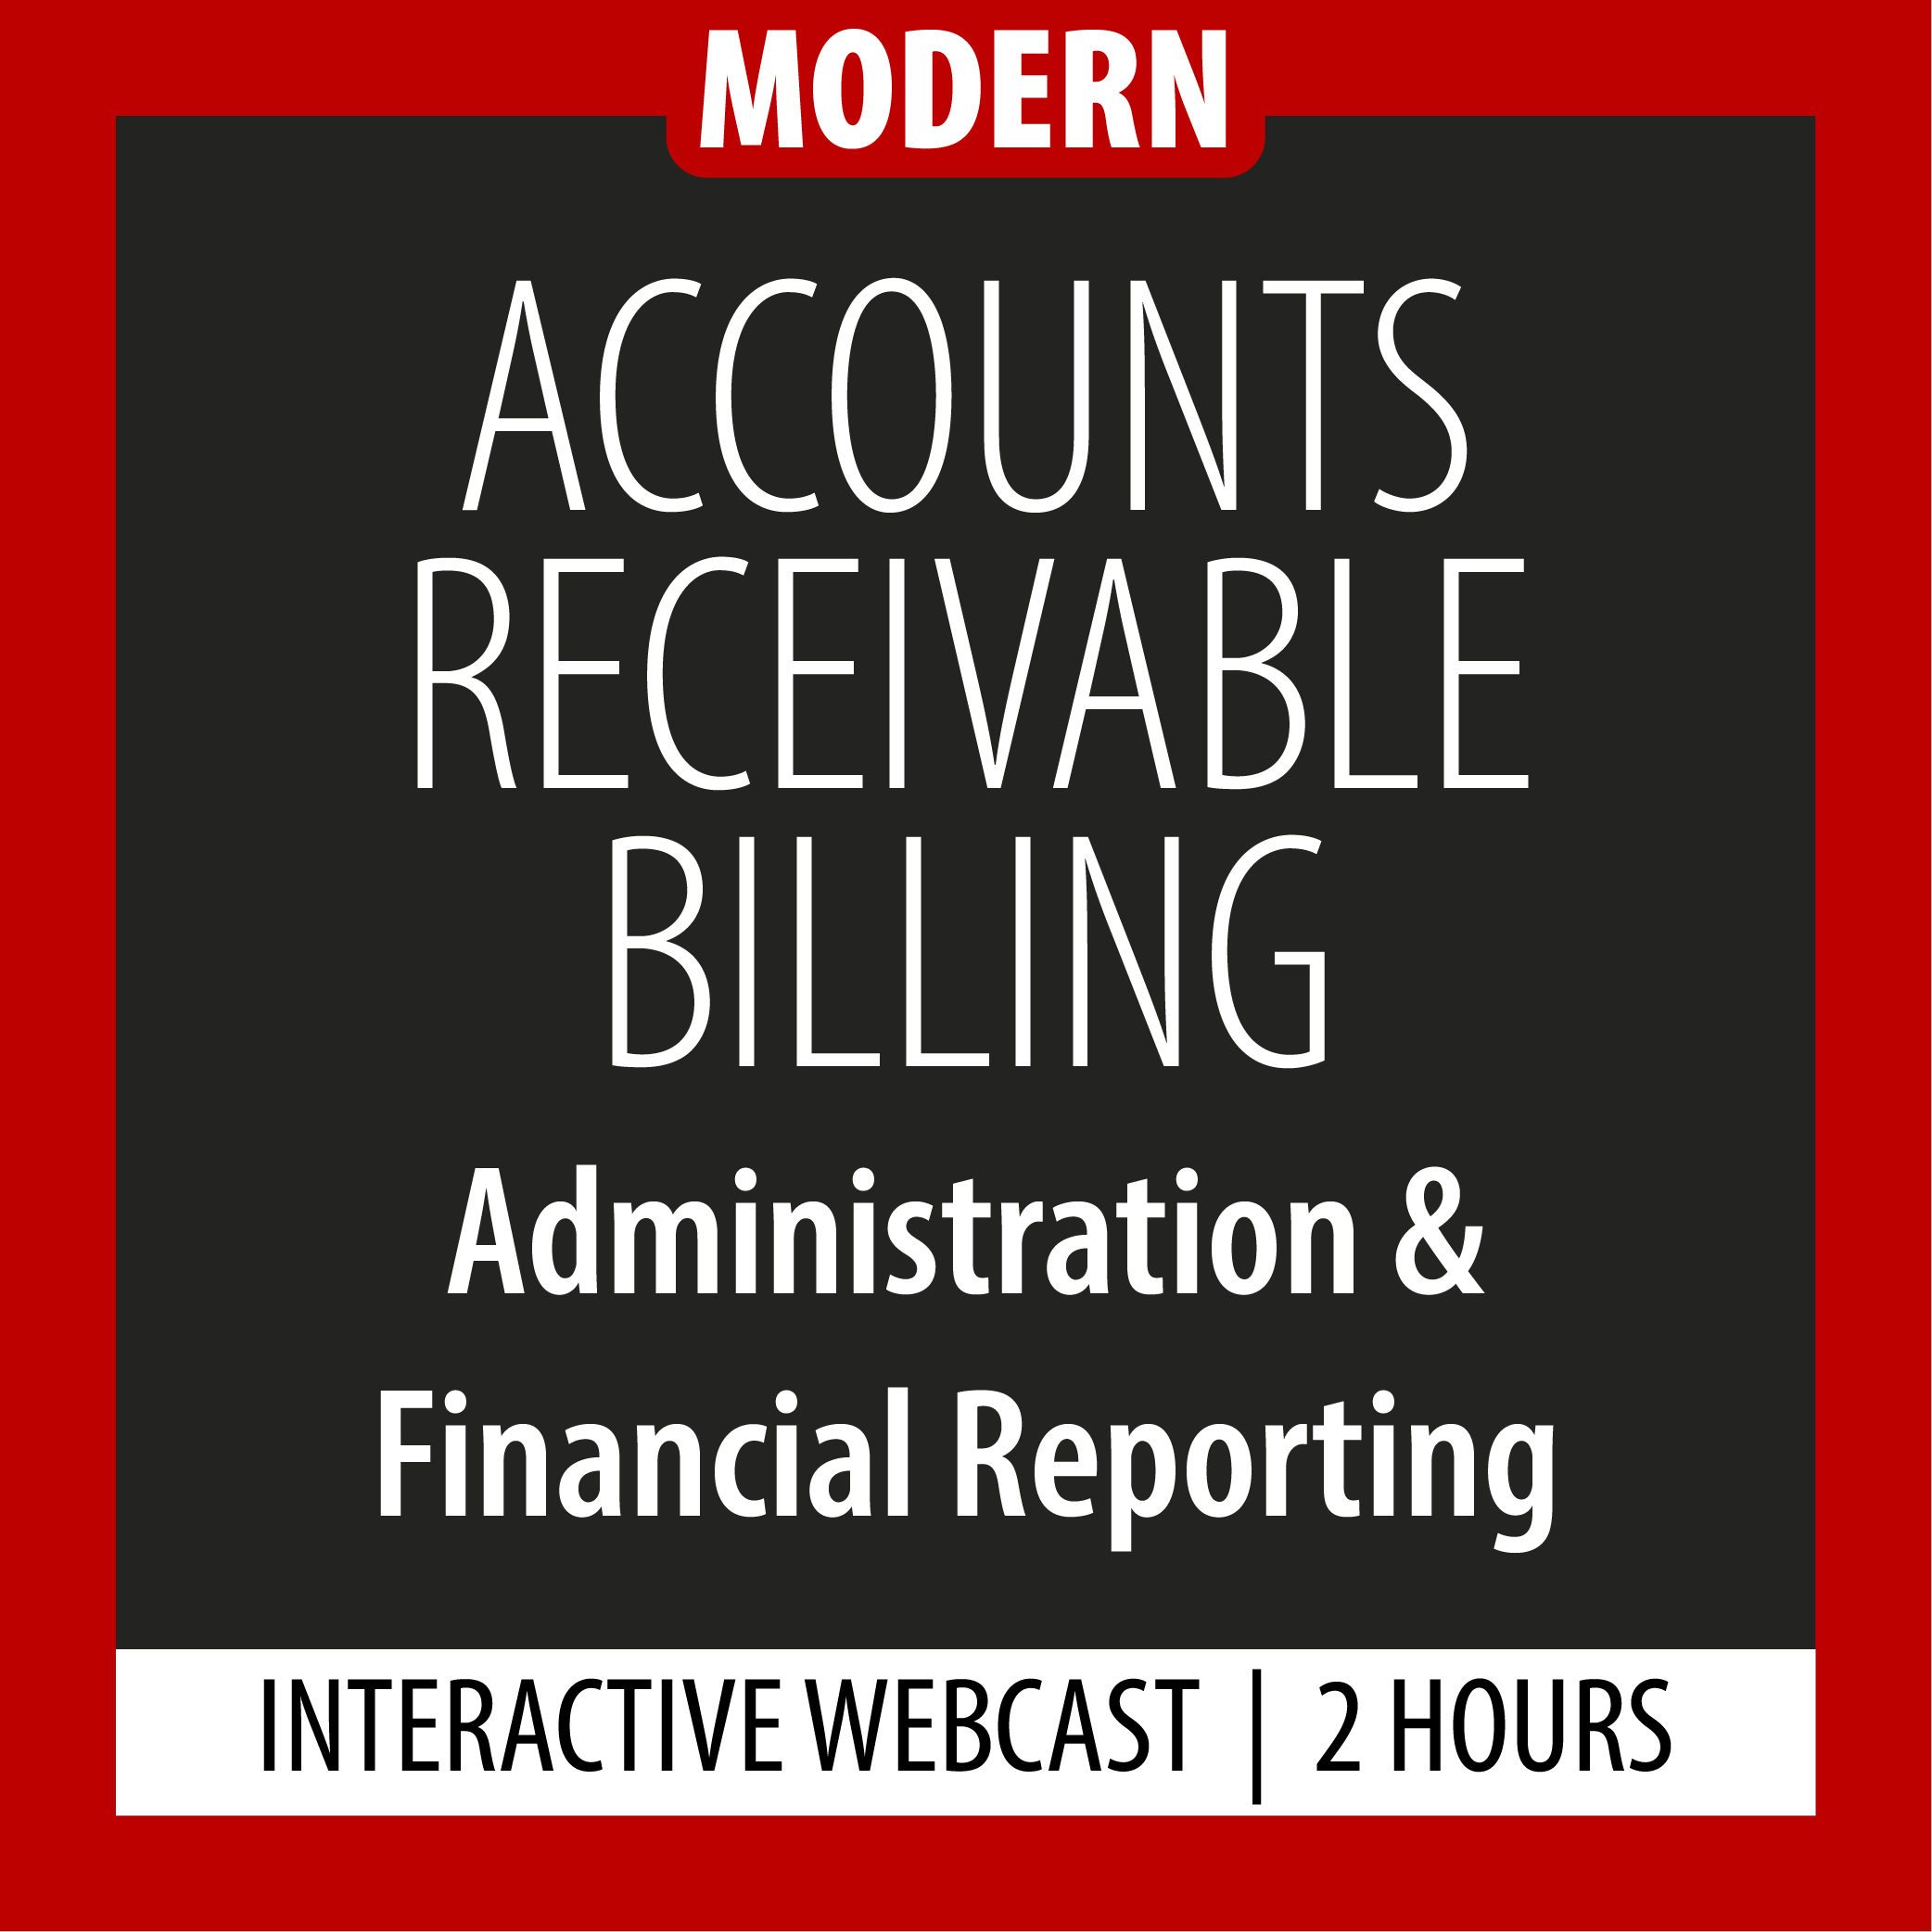 Modern - Accounts Receivable Billing - Administration & Financial Reporting - Webcast - 2 Hours